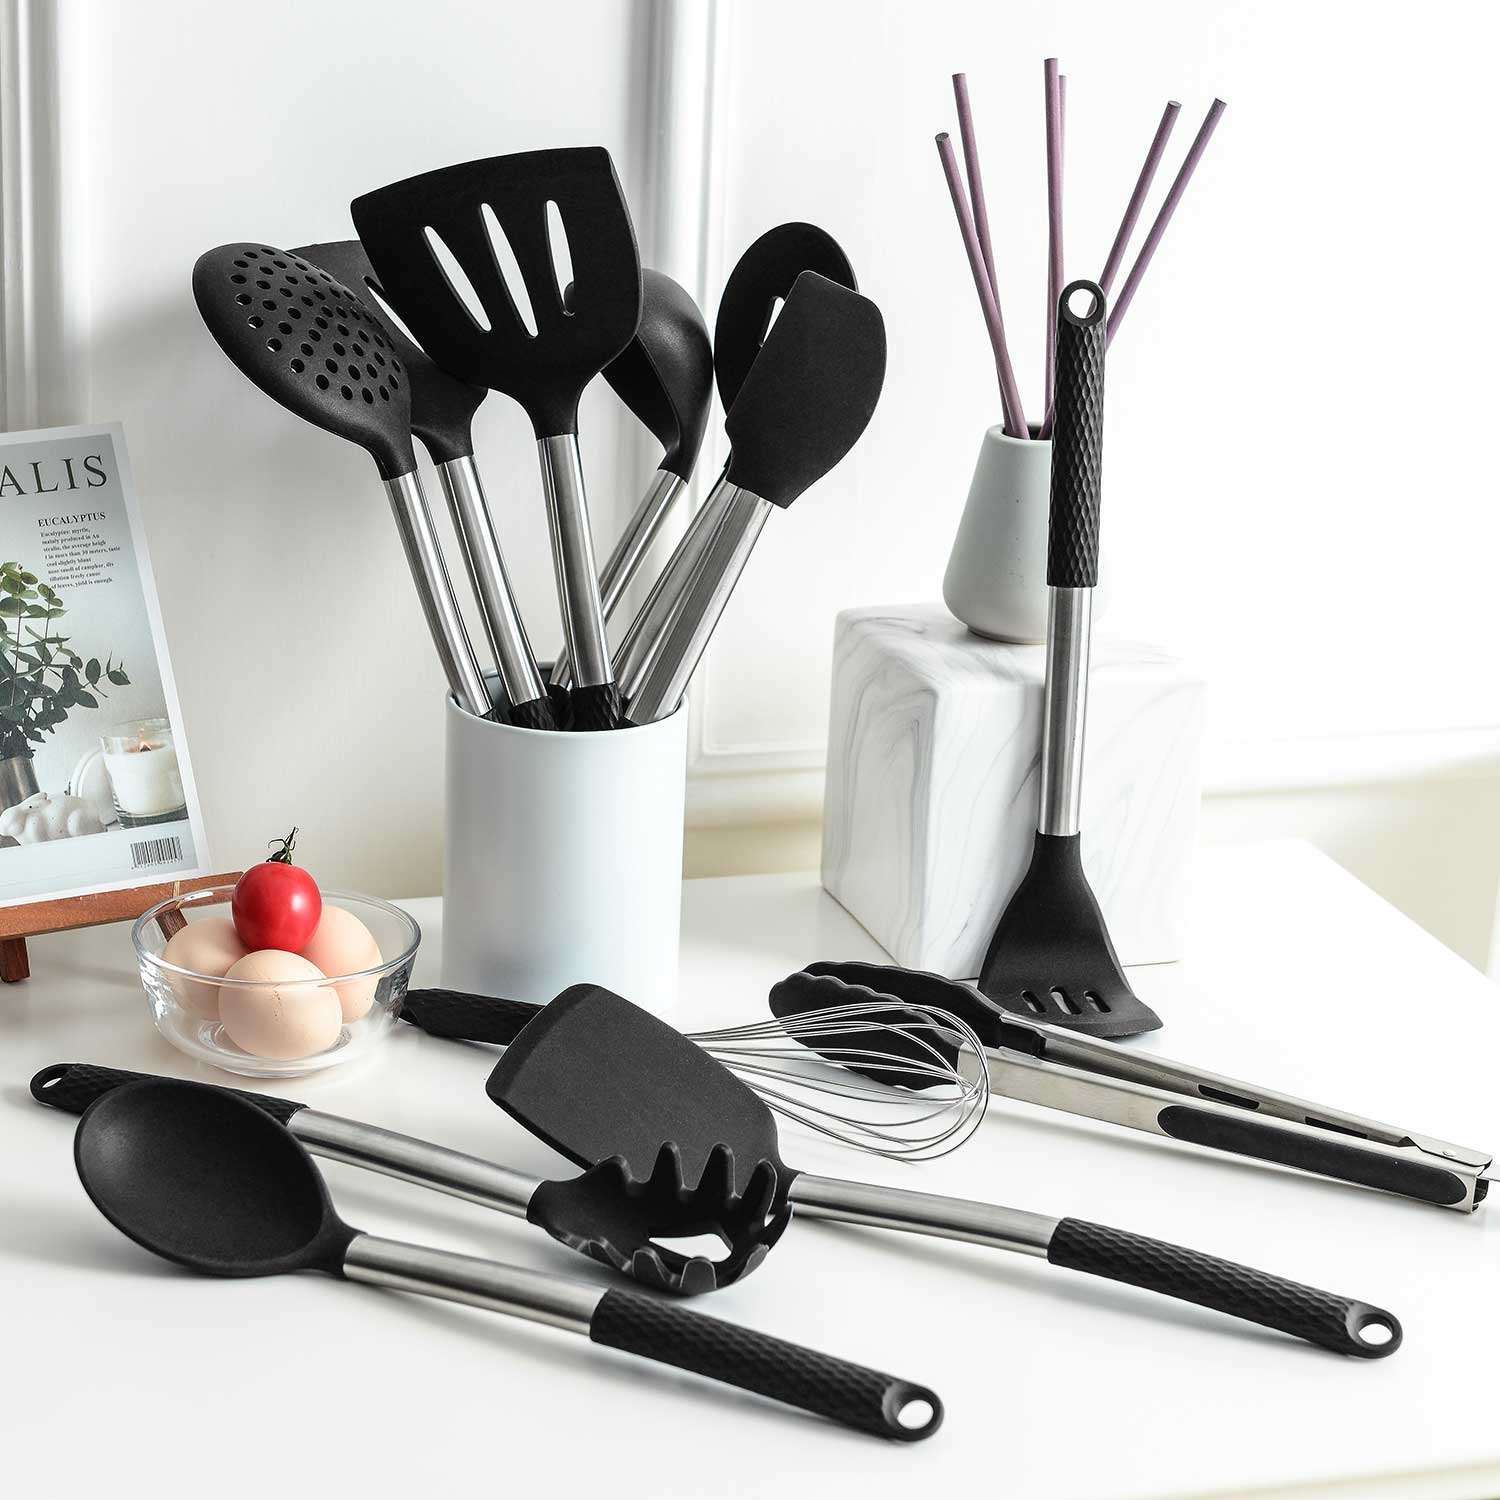 Pack of 12 Large Silicone Stainless Steel Cooking Utensils Set, Non-stick Heat Resistant